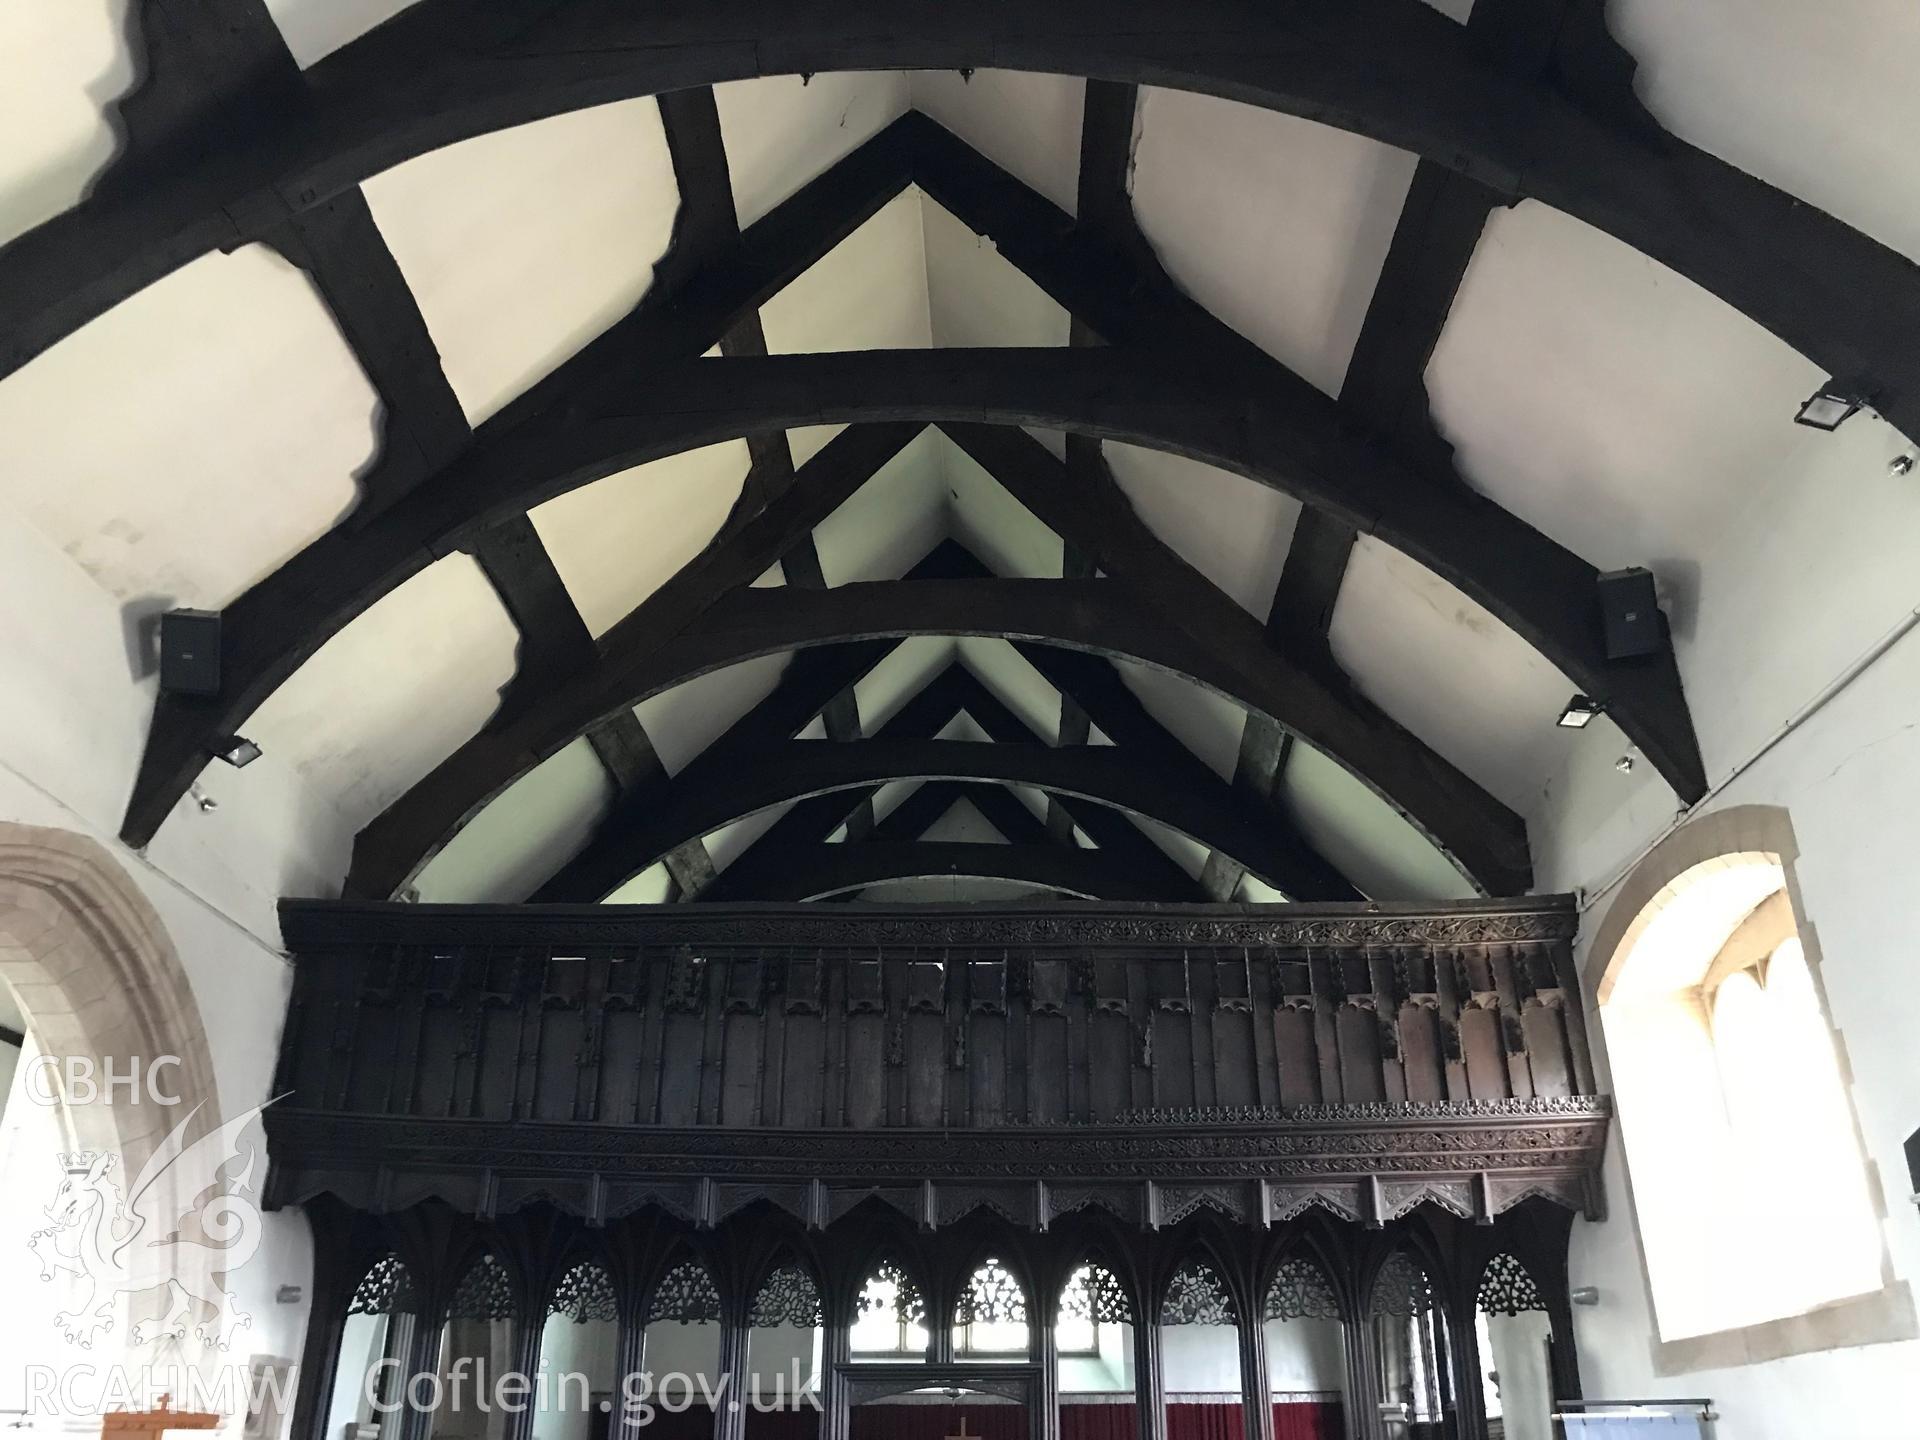 Colour photo showing interior of St. Grwst's Church, Llanrwst, including wooden beams and rood screen taken by Paul R. Davis, 23rd June 2018.